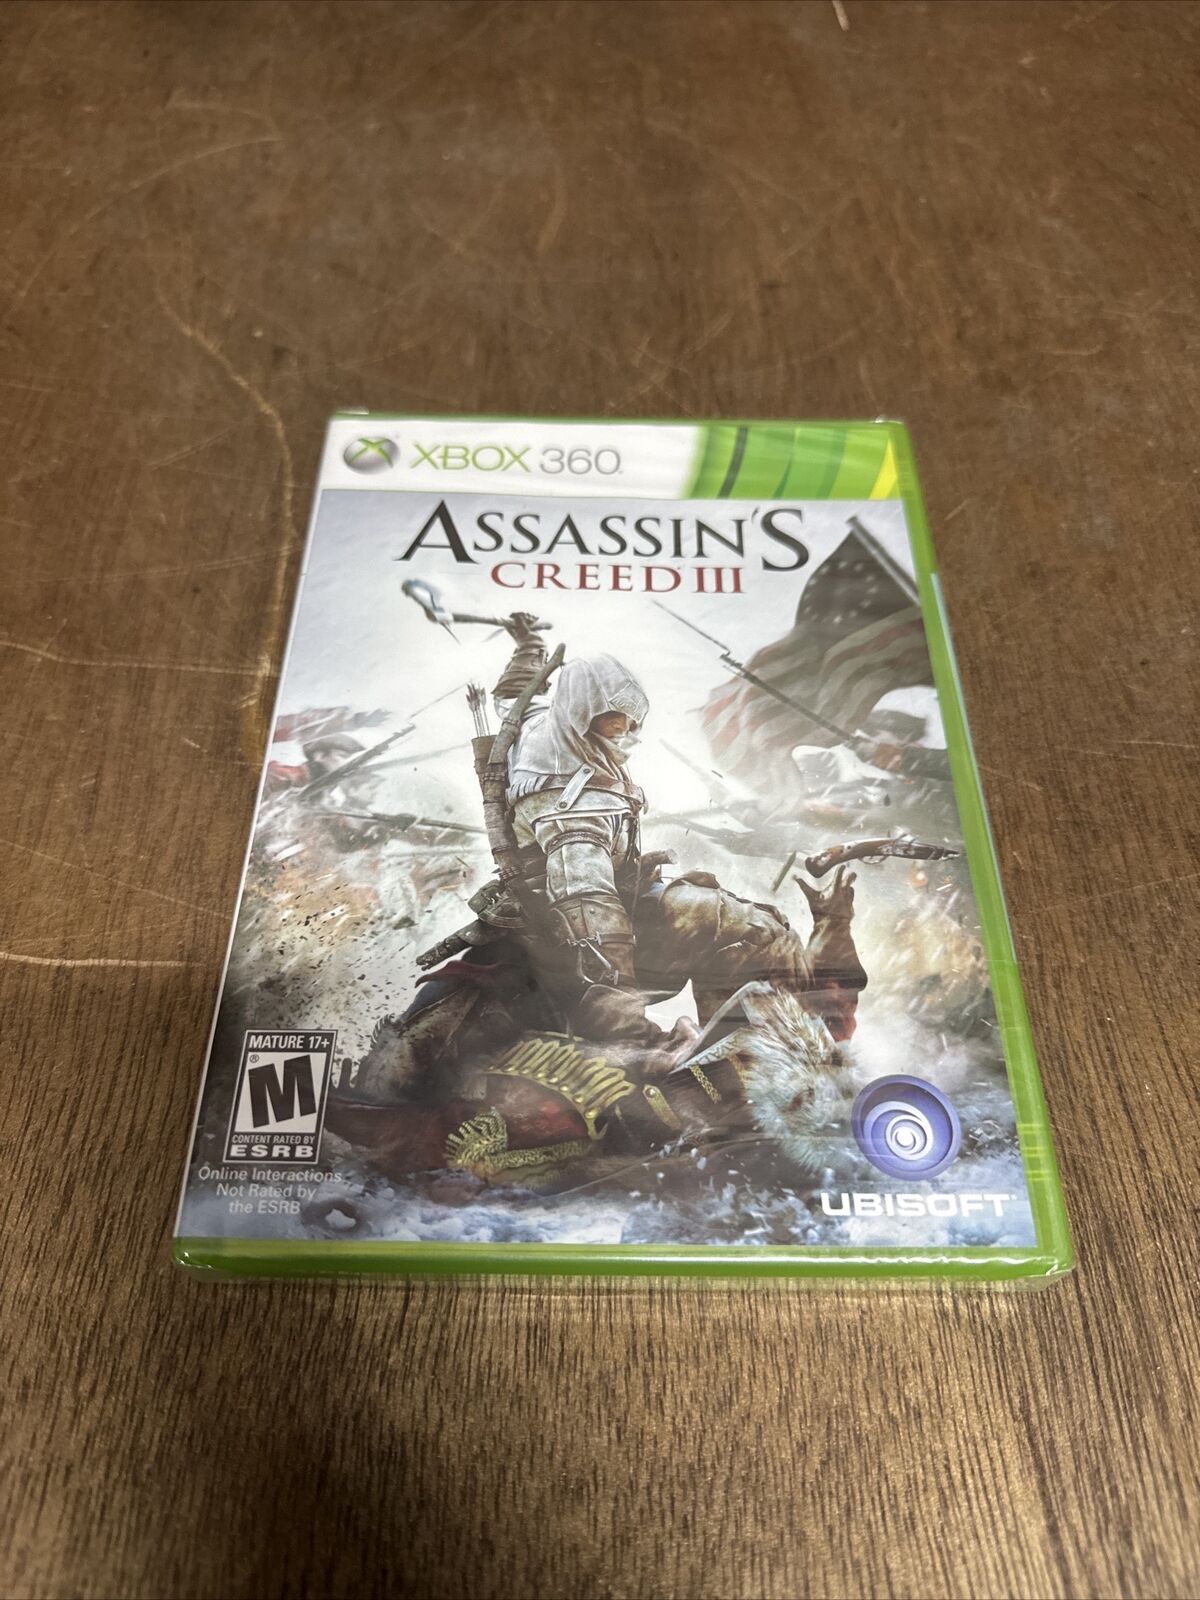 Sealed NEW Assassins Creed III 3: Platinum Hits Limited Edition Xbox 360 read